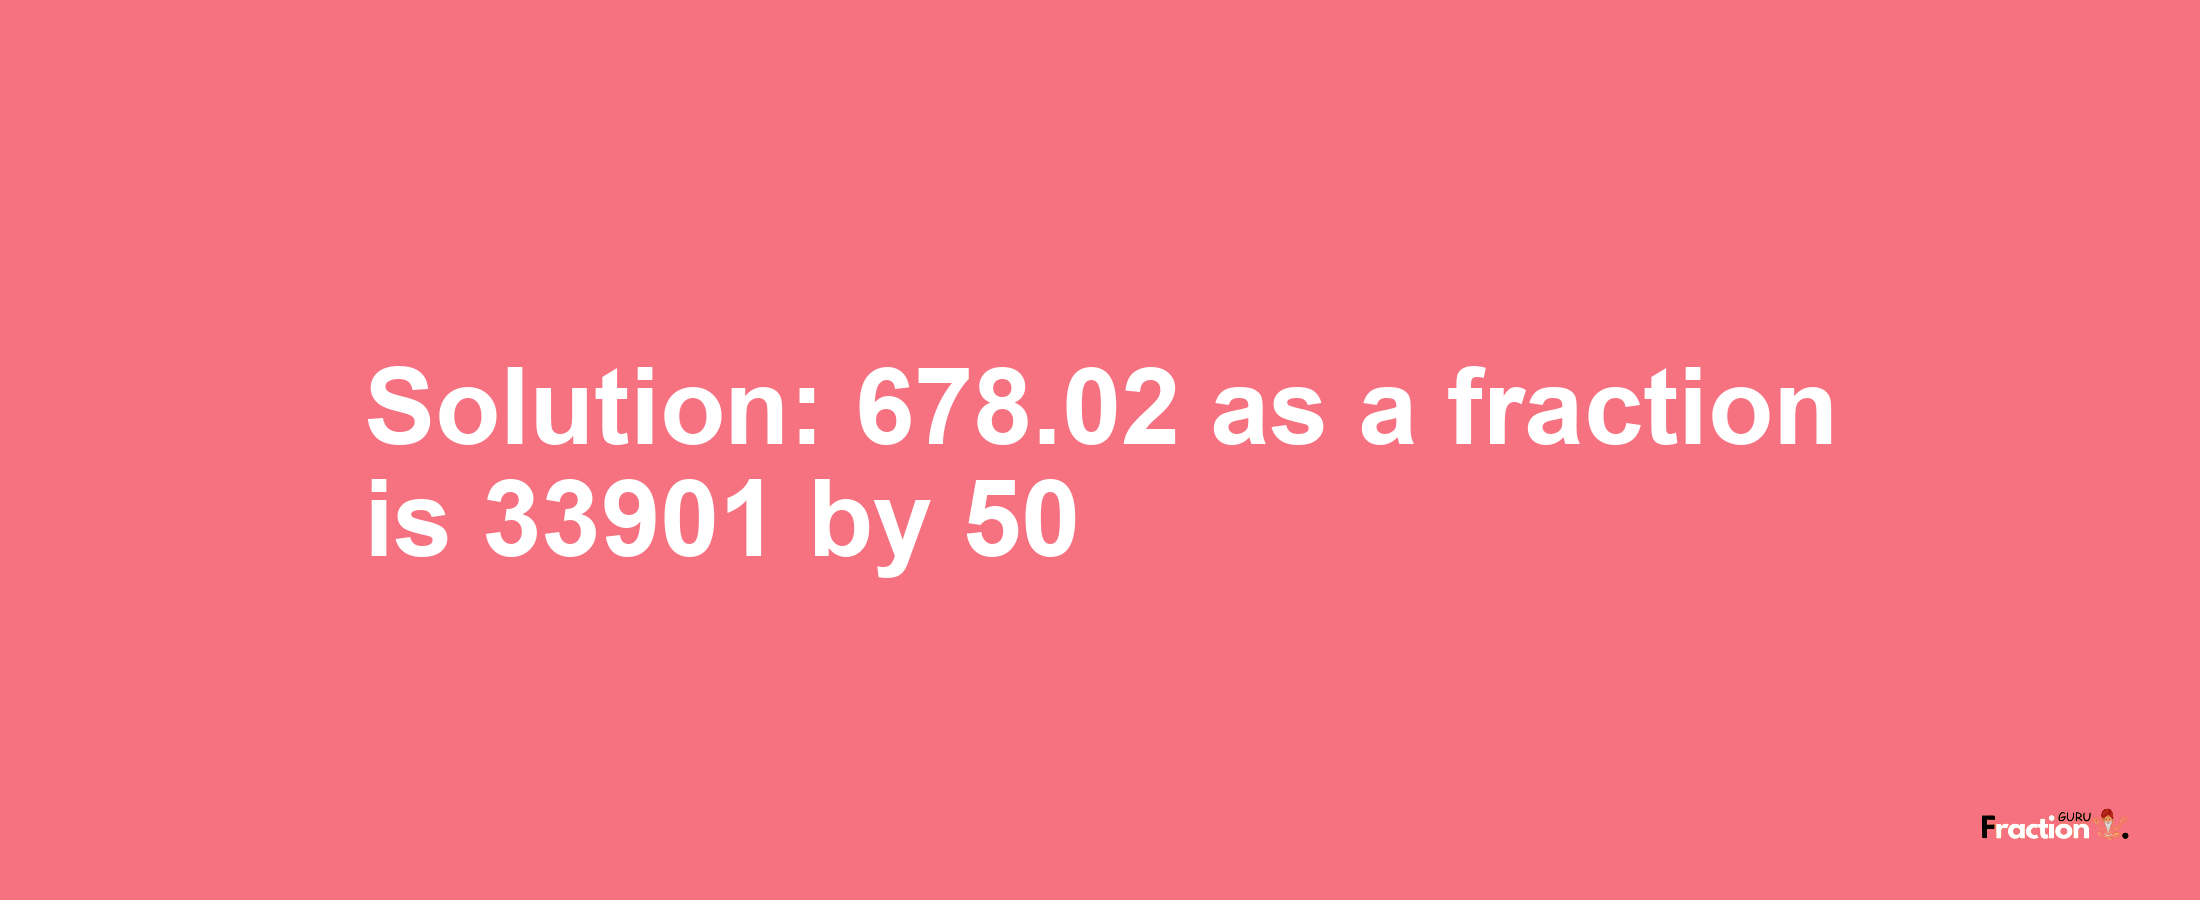 Solution:678.02 as a fraction is 33901/50